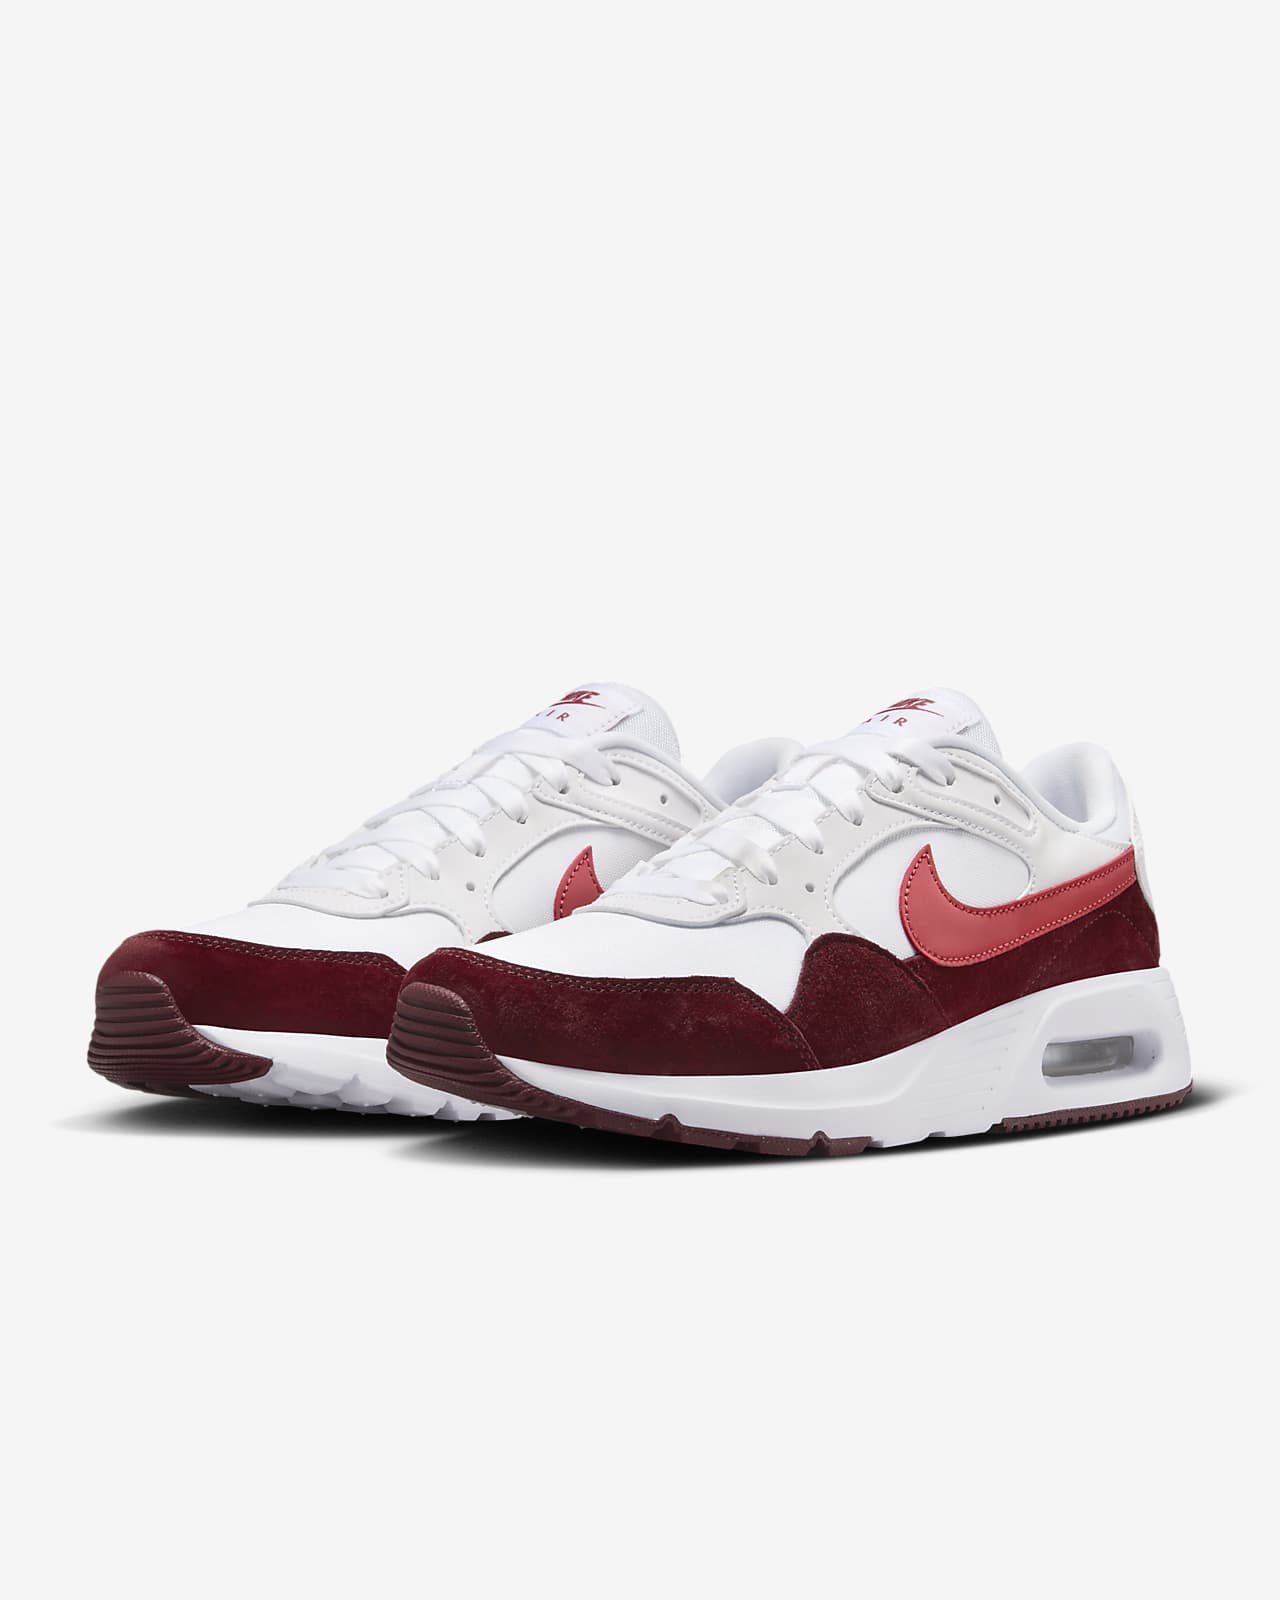 NIKE Air Max 1 SC Suede, Mesh and Leather Sneakers for Men